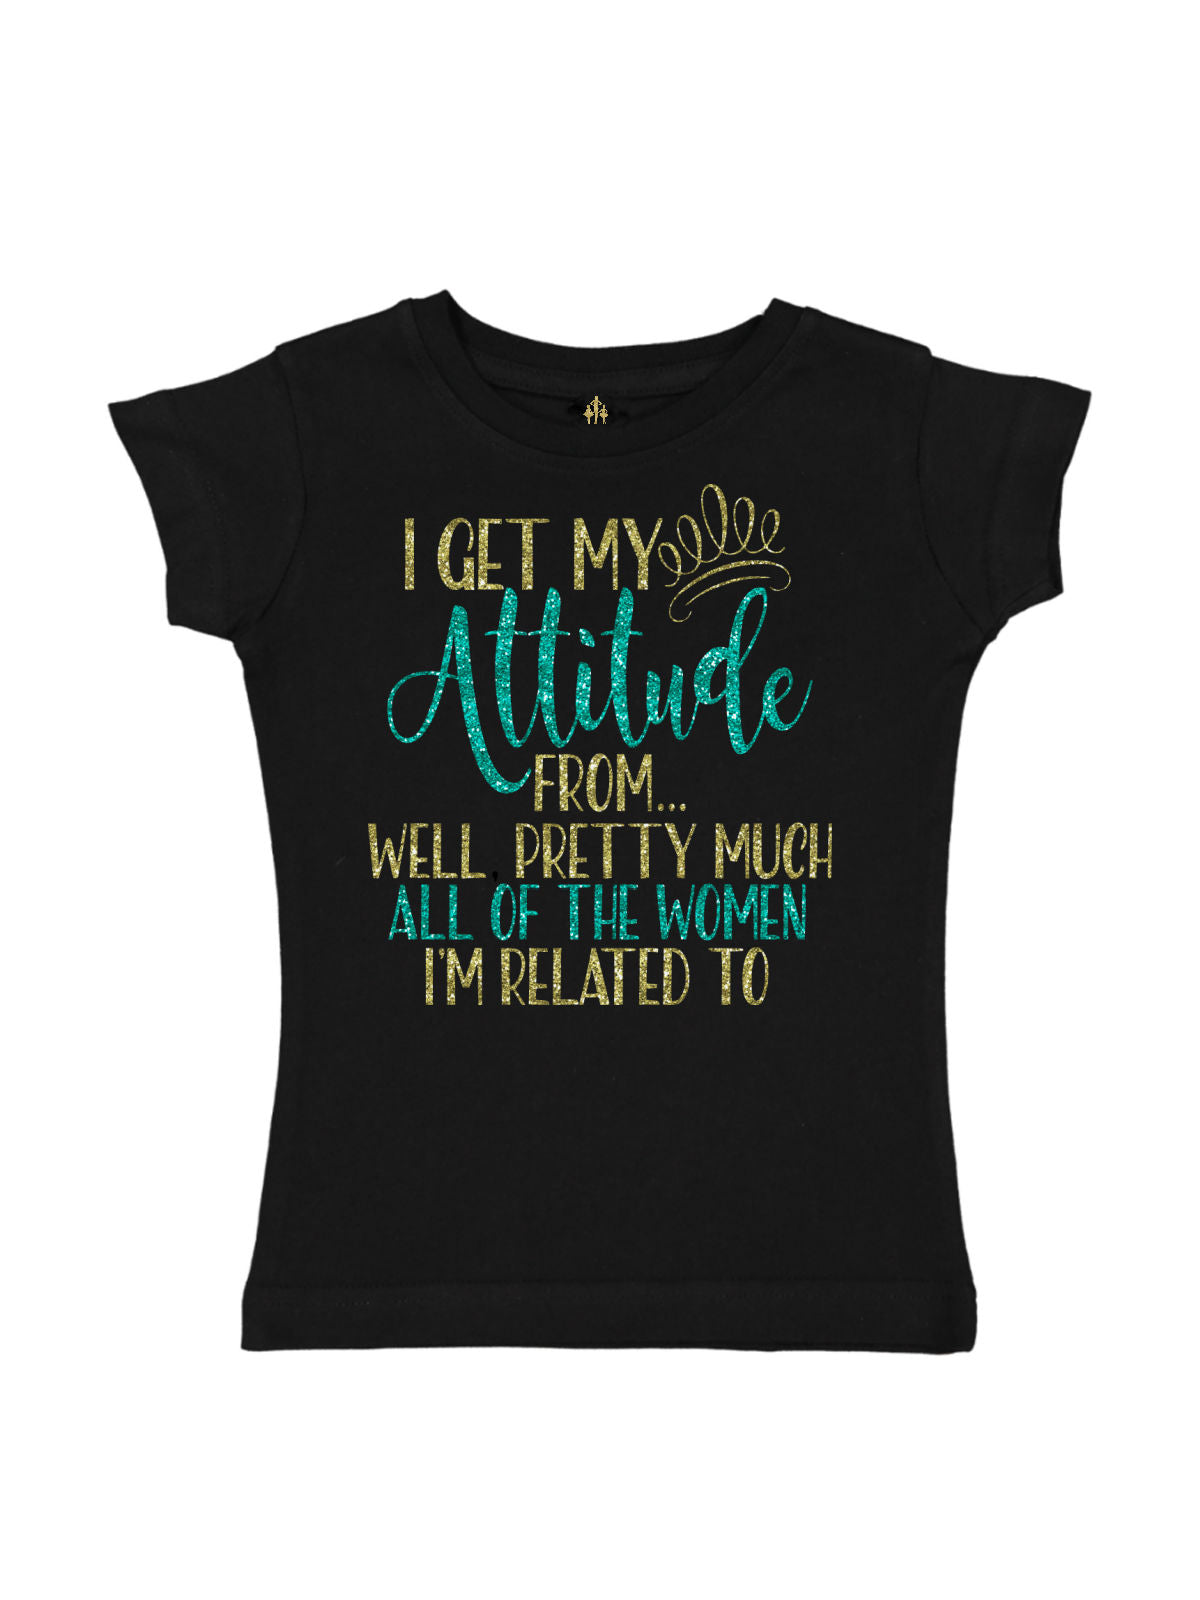 I Get My Attitude From Girls Shirt in Black